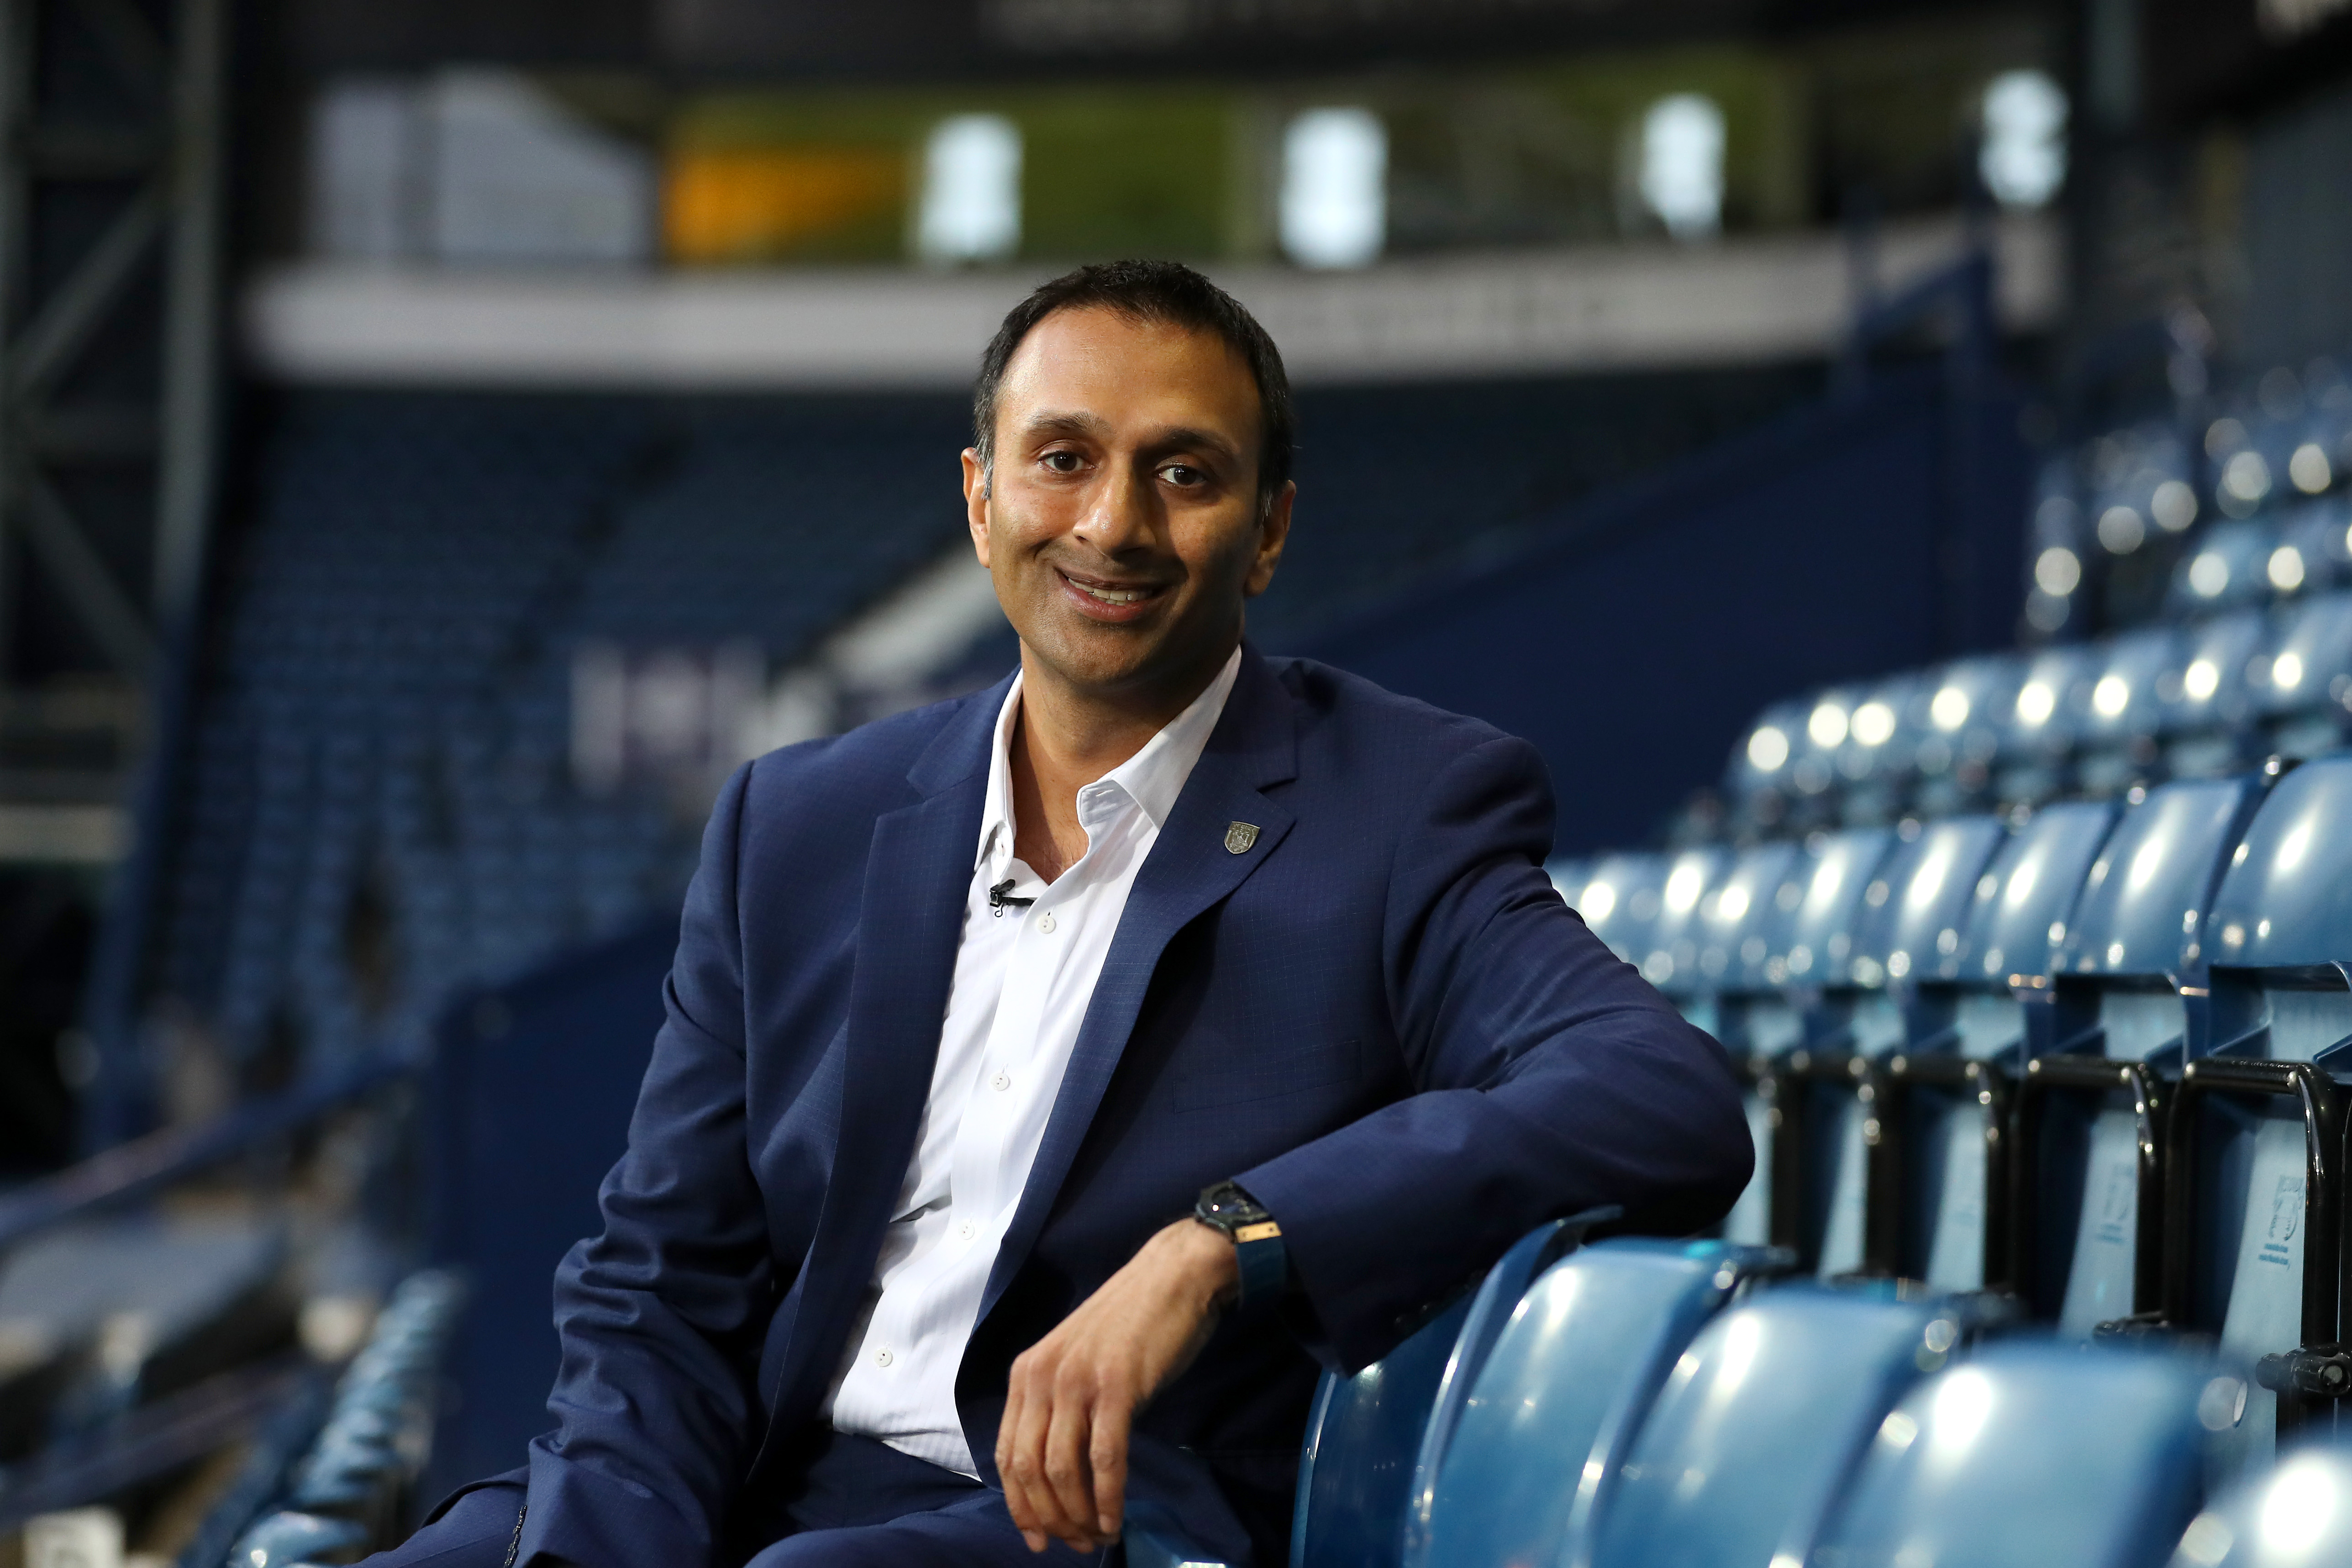 Shilen Patel sat in the West Stand at The Hawthorns in a suit smiling at the camera